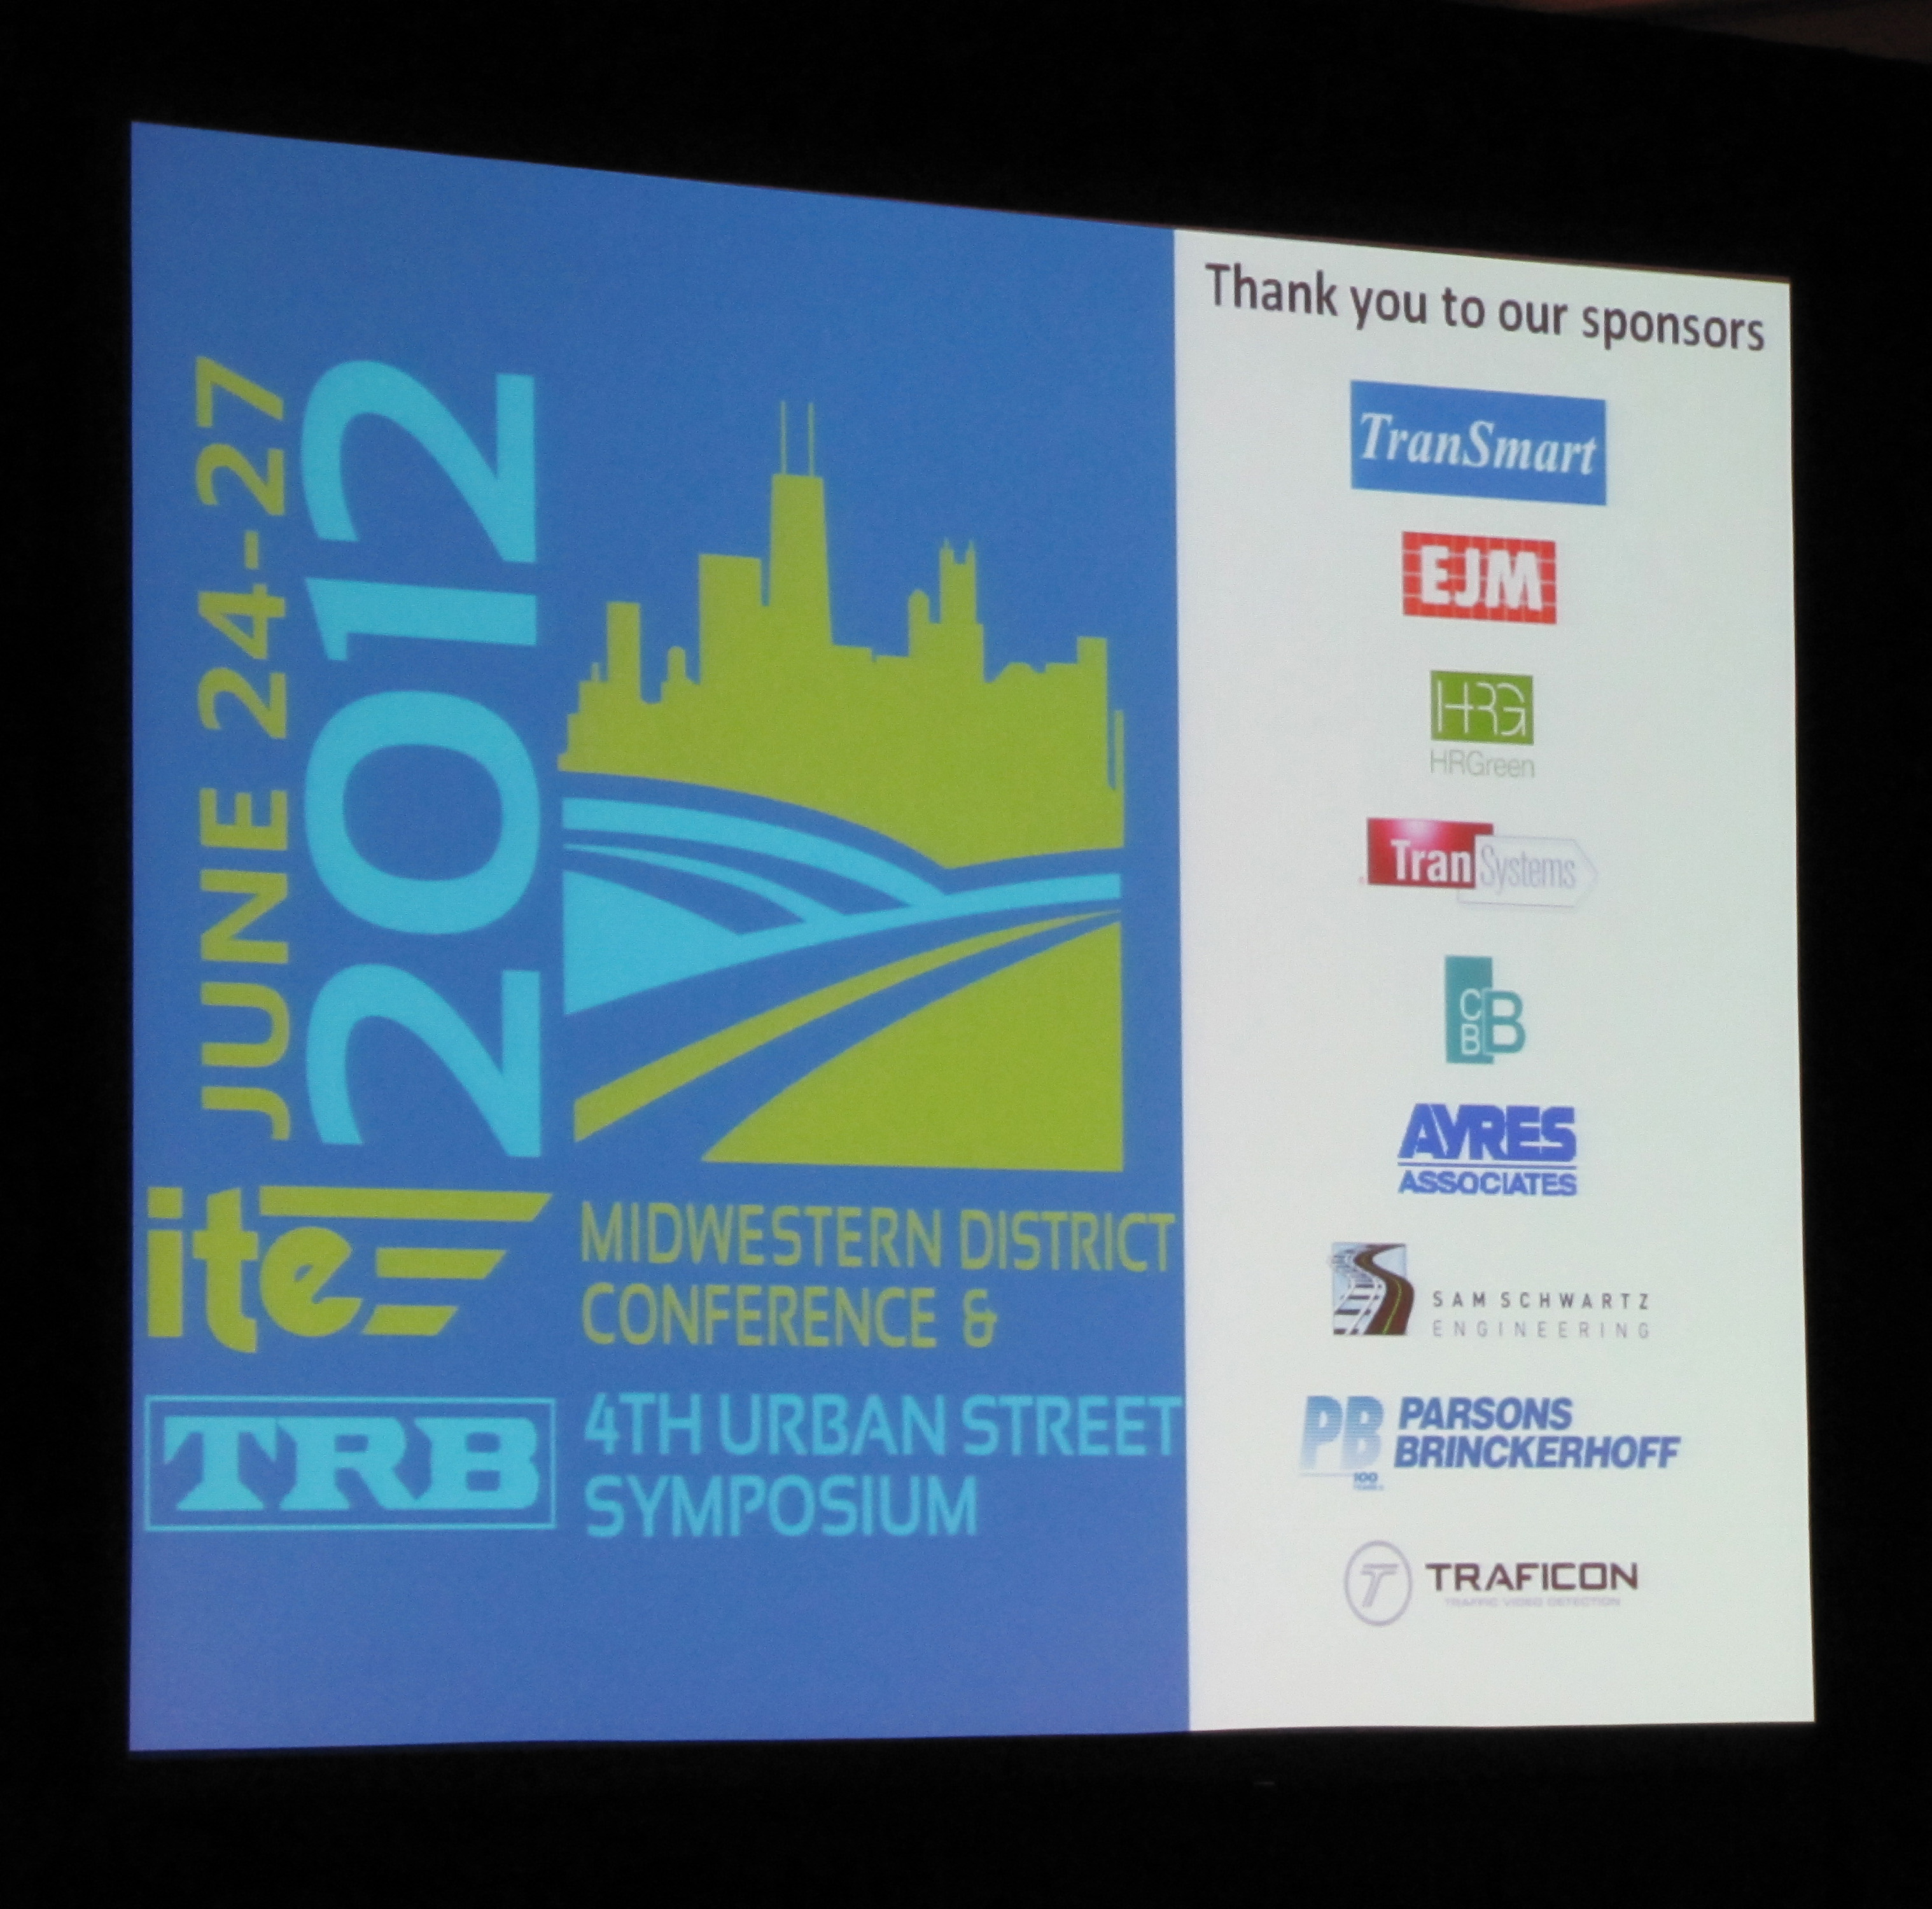 4th Urban Street Symposium: Slide from opening session listing the symposium sponsors